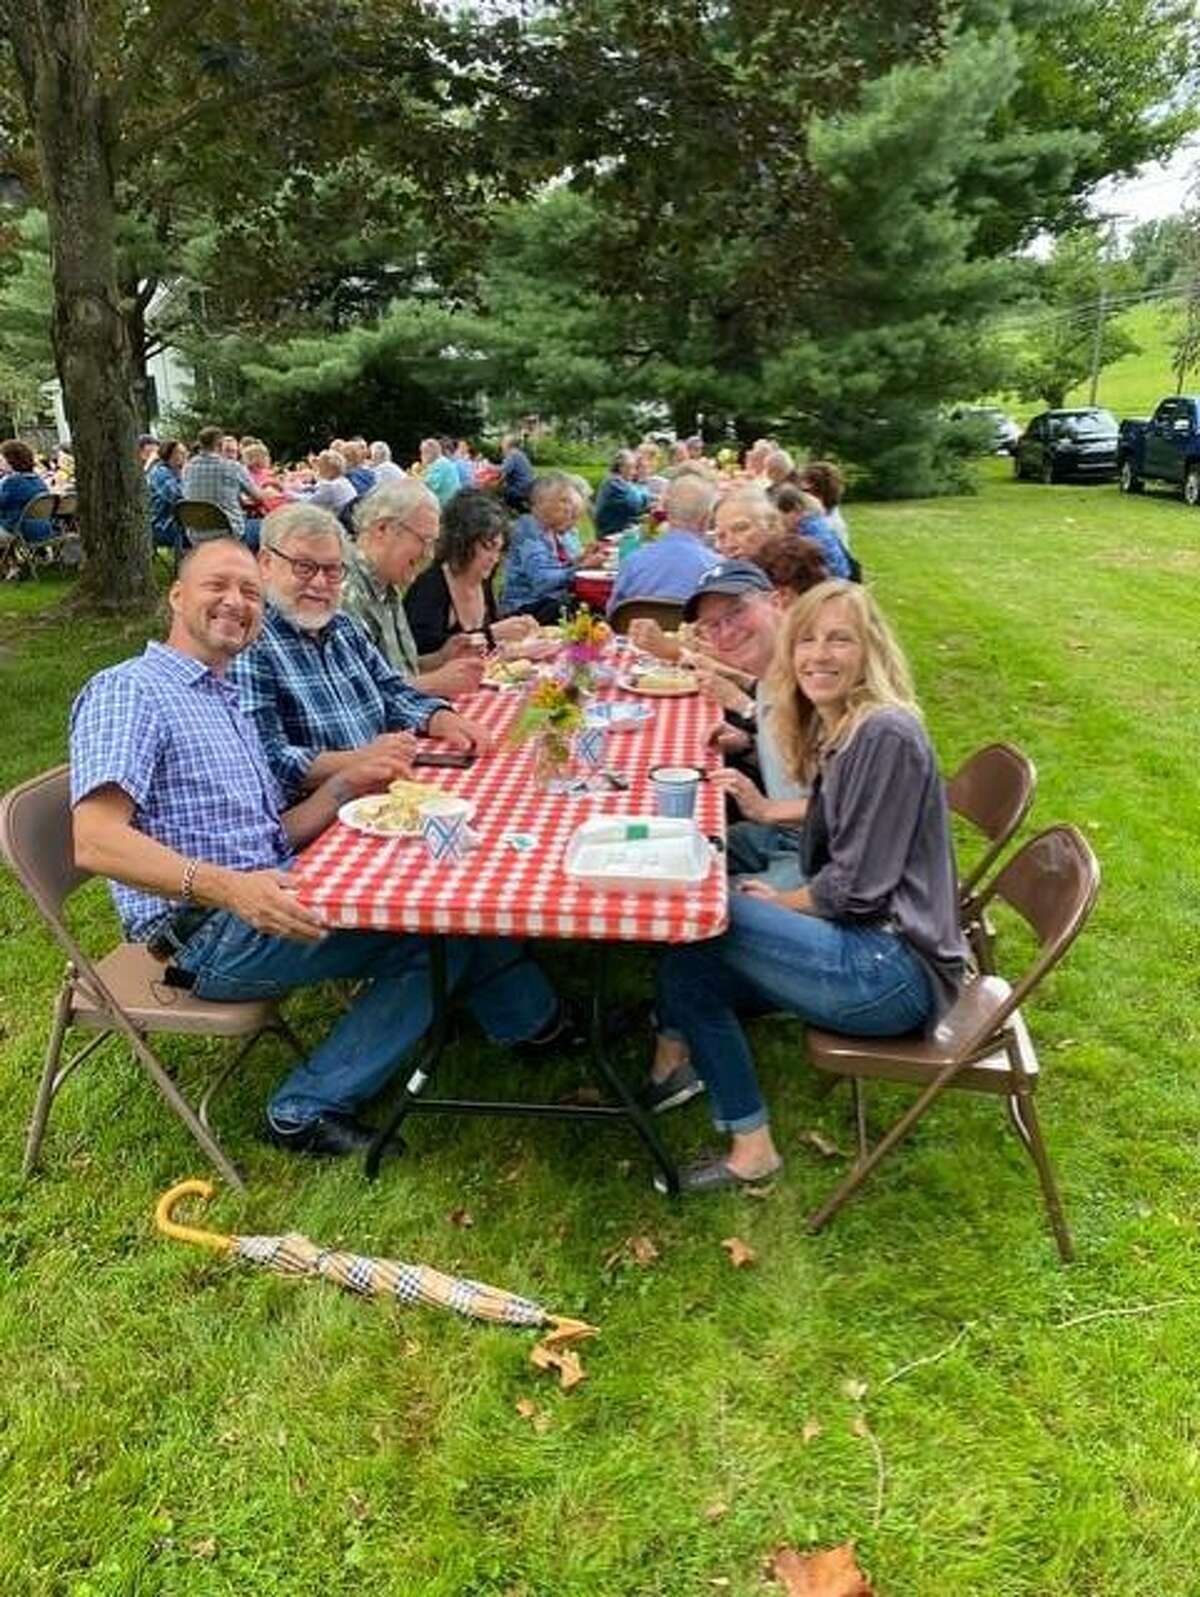 The Roxbury Congregational Church is hosting its old-fashioned, traditional beef barbecue event on Saturday, from 5 to 7 p.m. on the grounds of the church at 24 Church St.